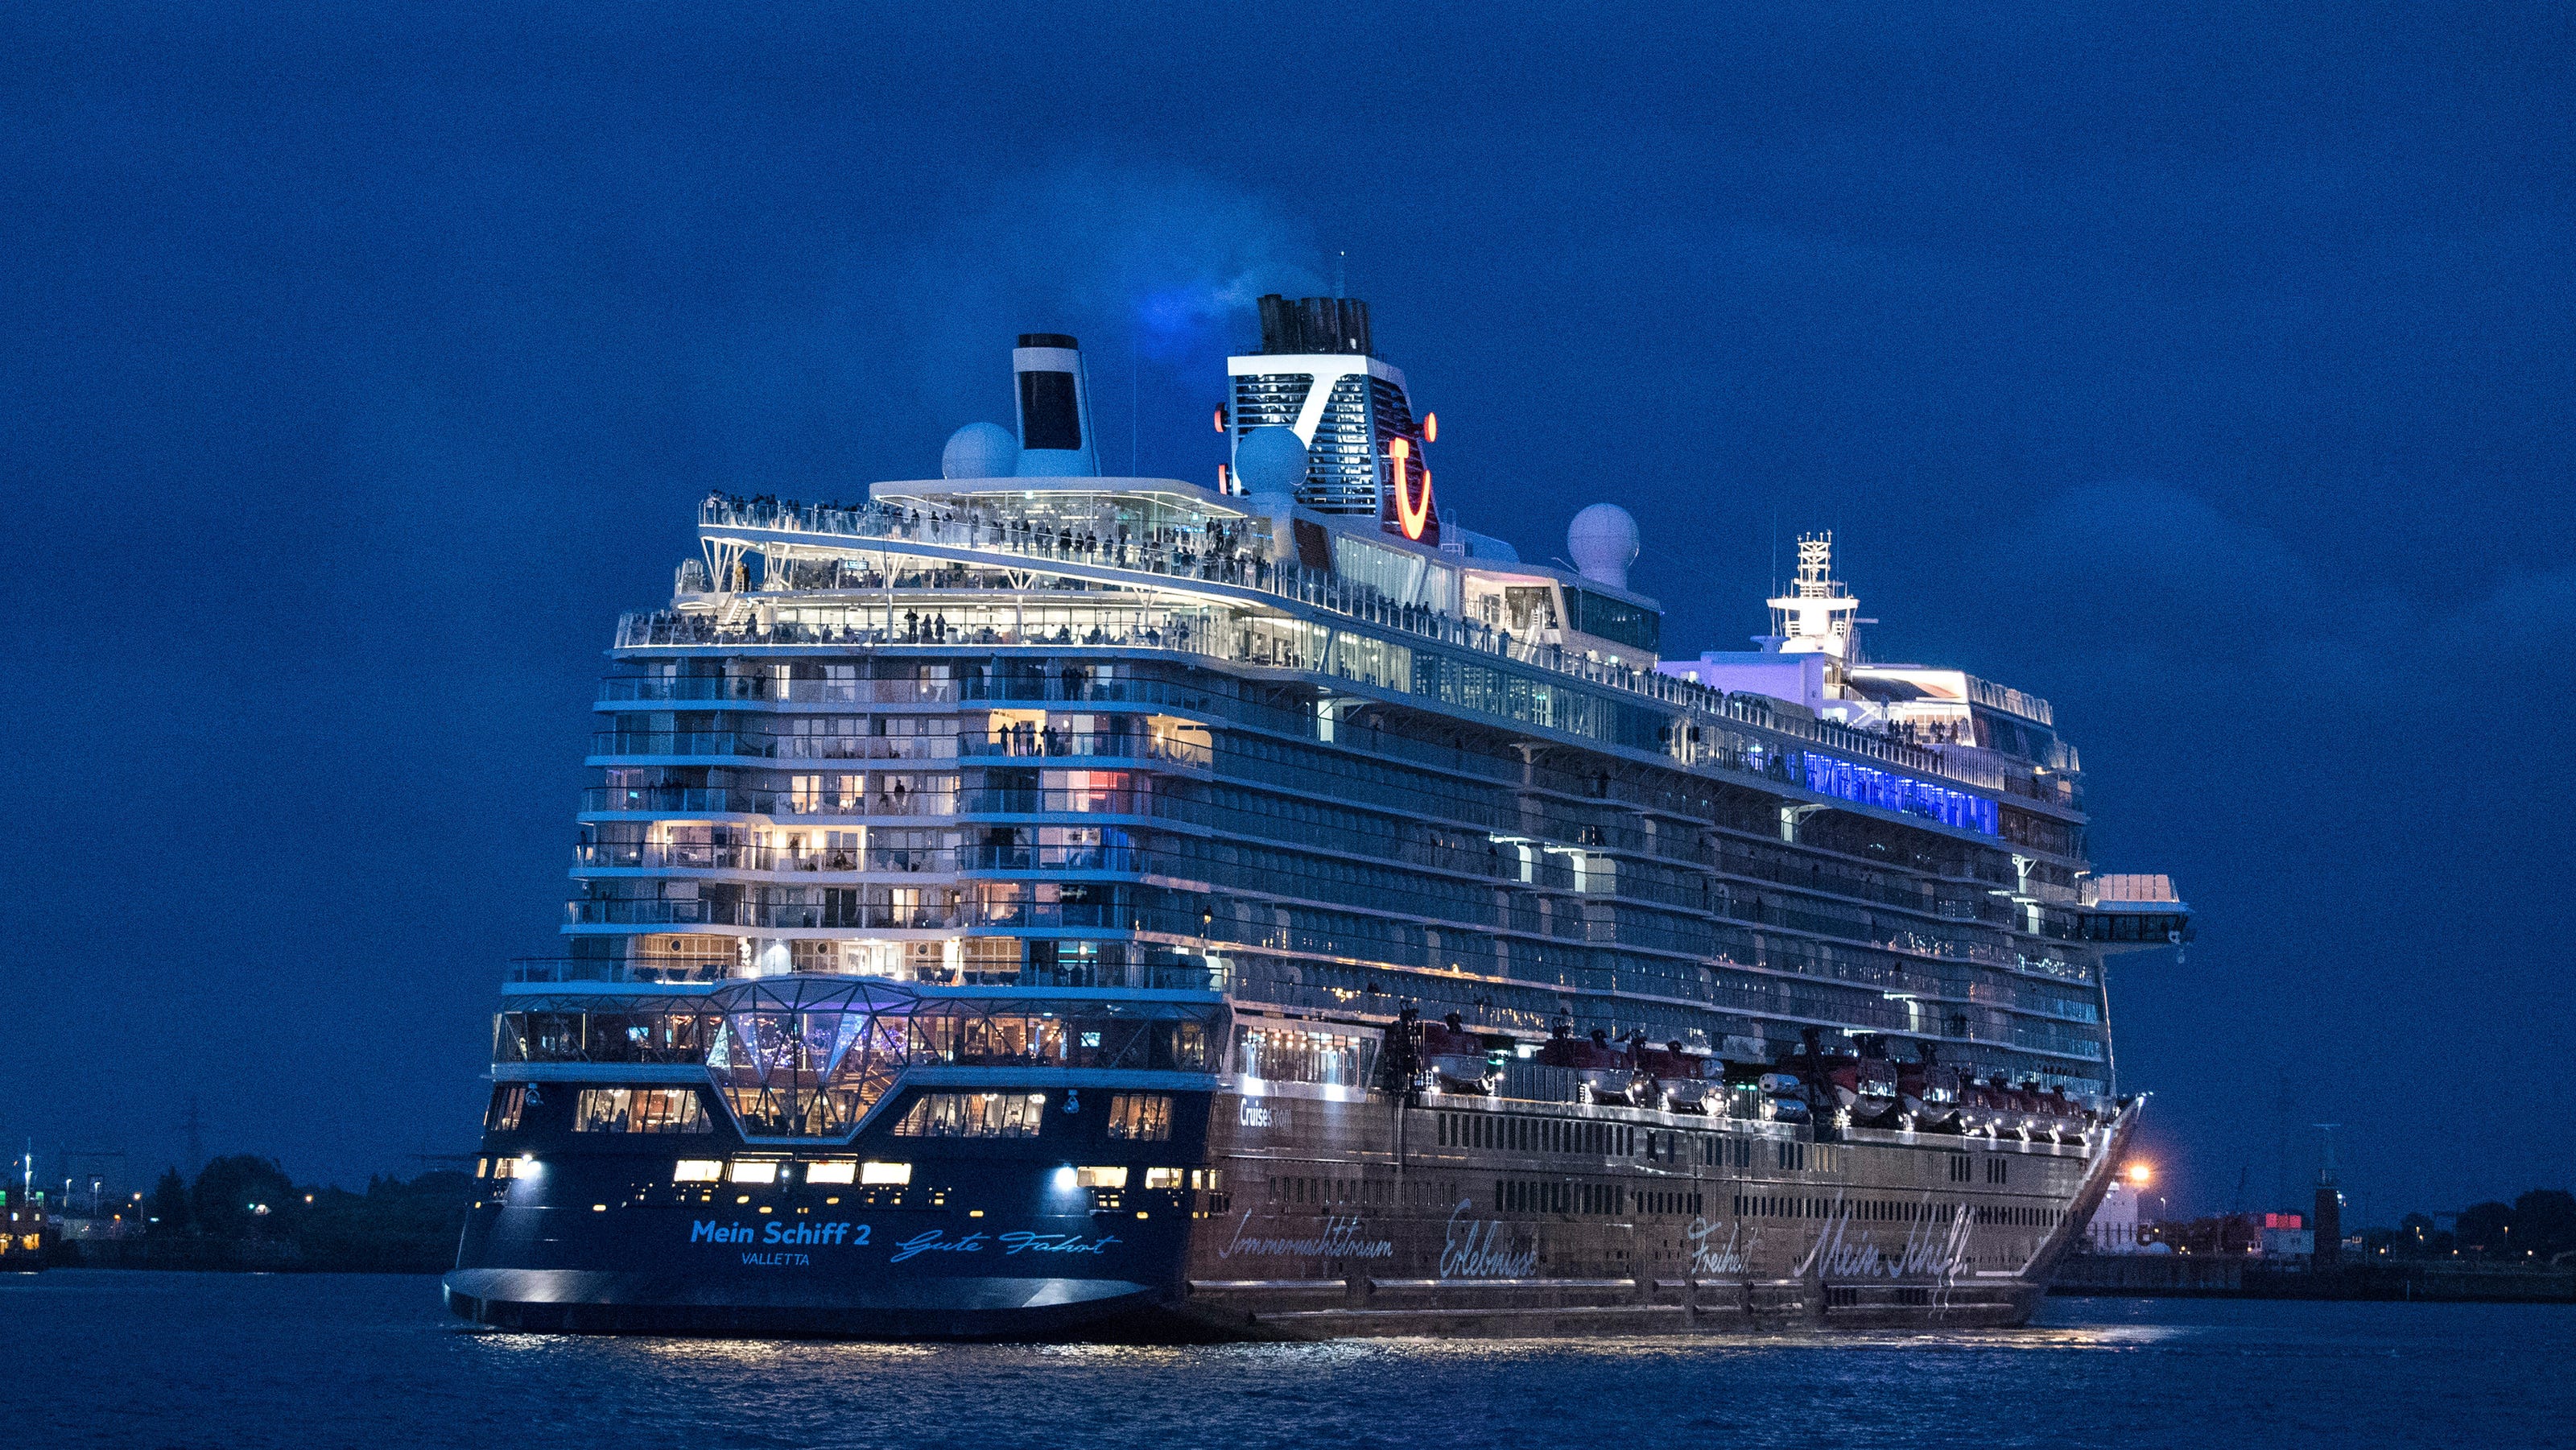 TUI Cruises' Mein Schiff 2 sails on return voyage with 1,200 people